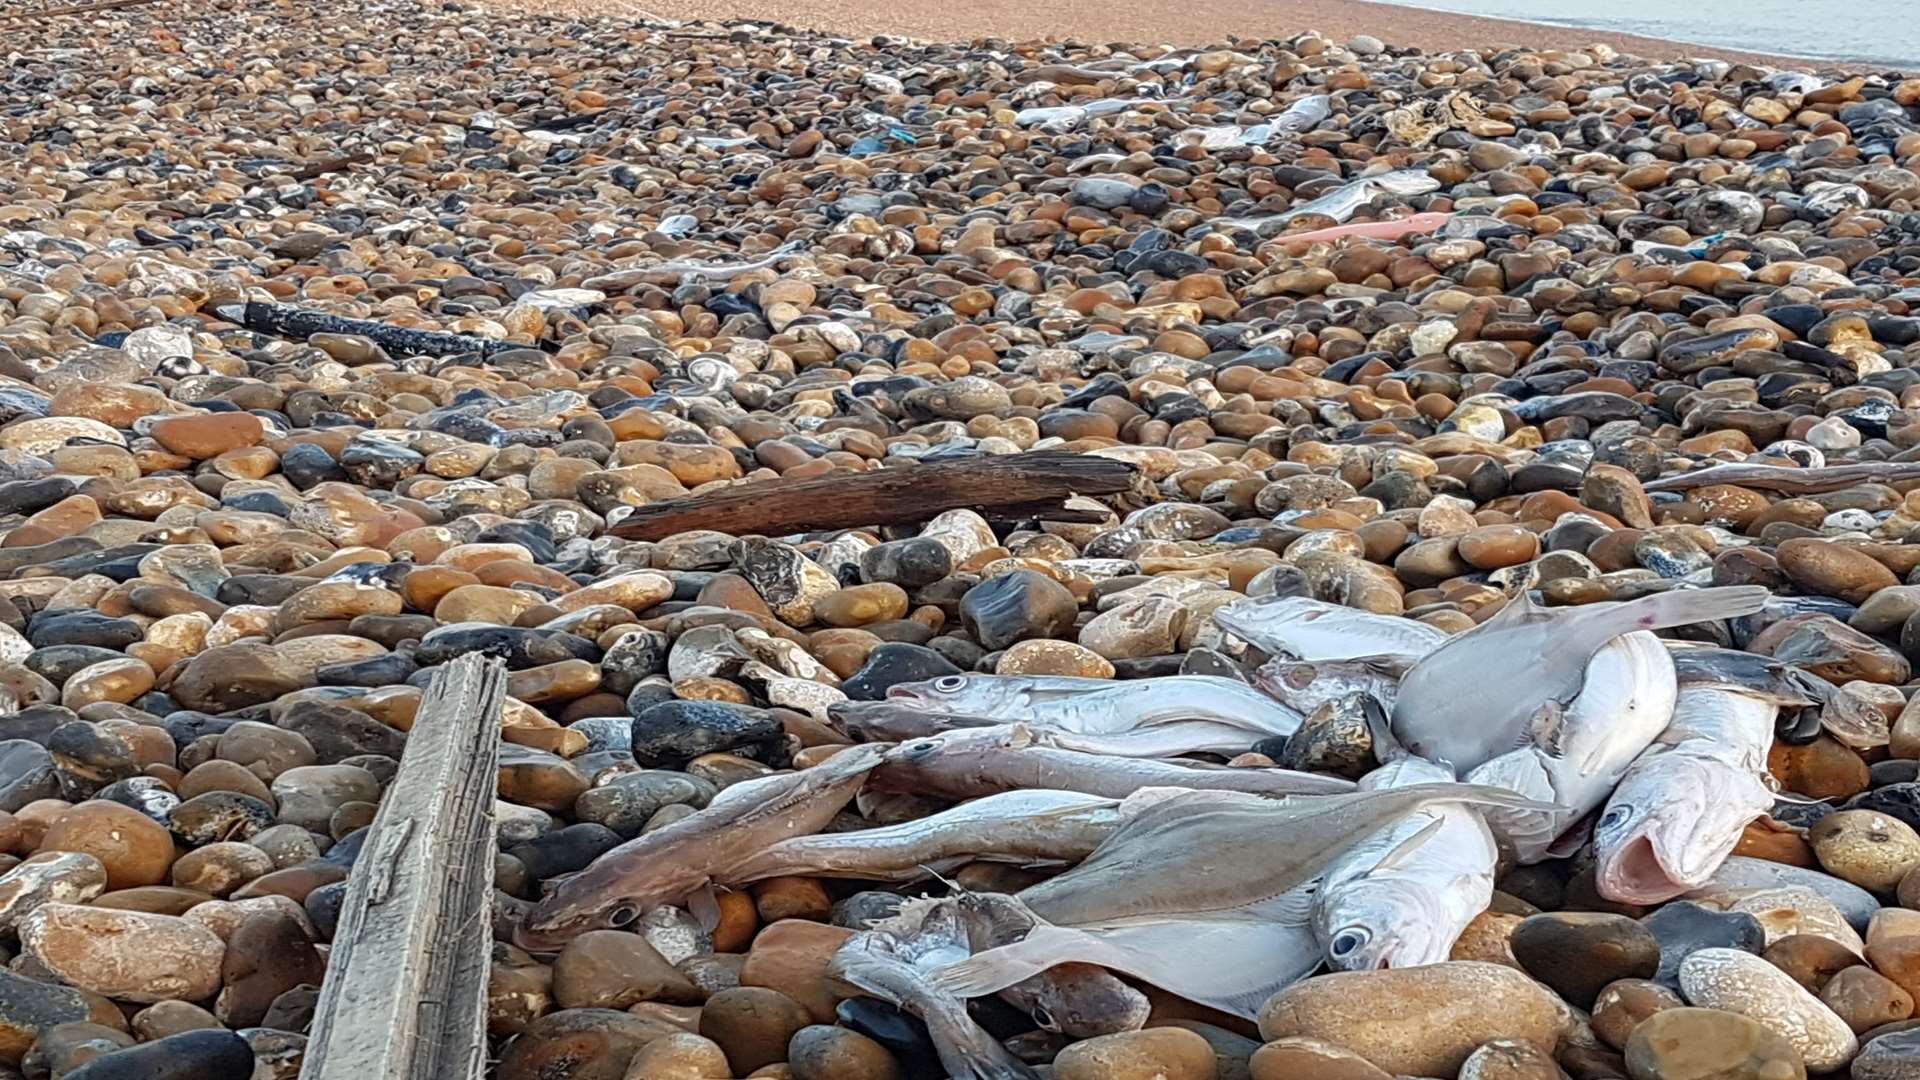 A total of 50 dead fish were found on Seabrook beach